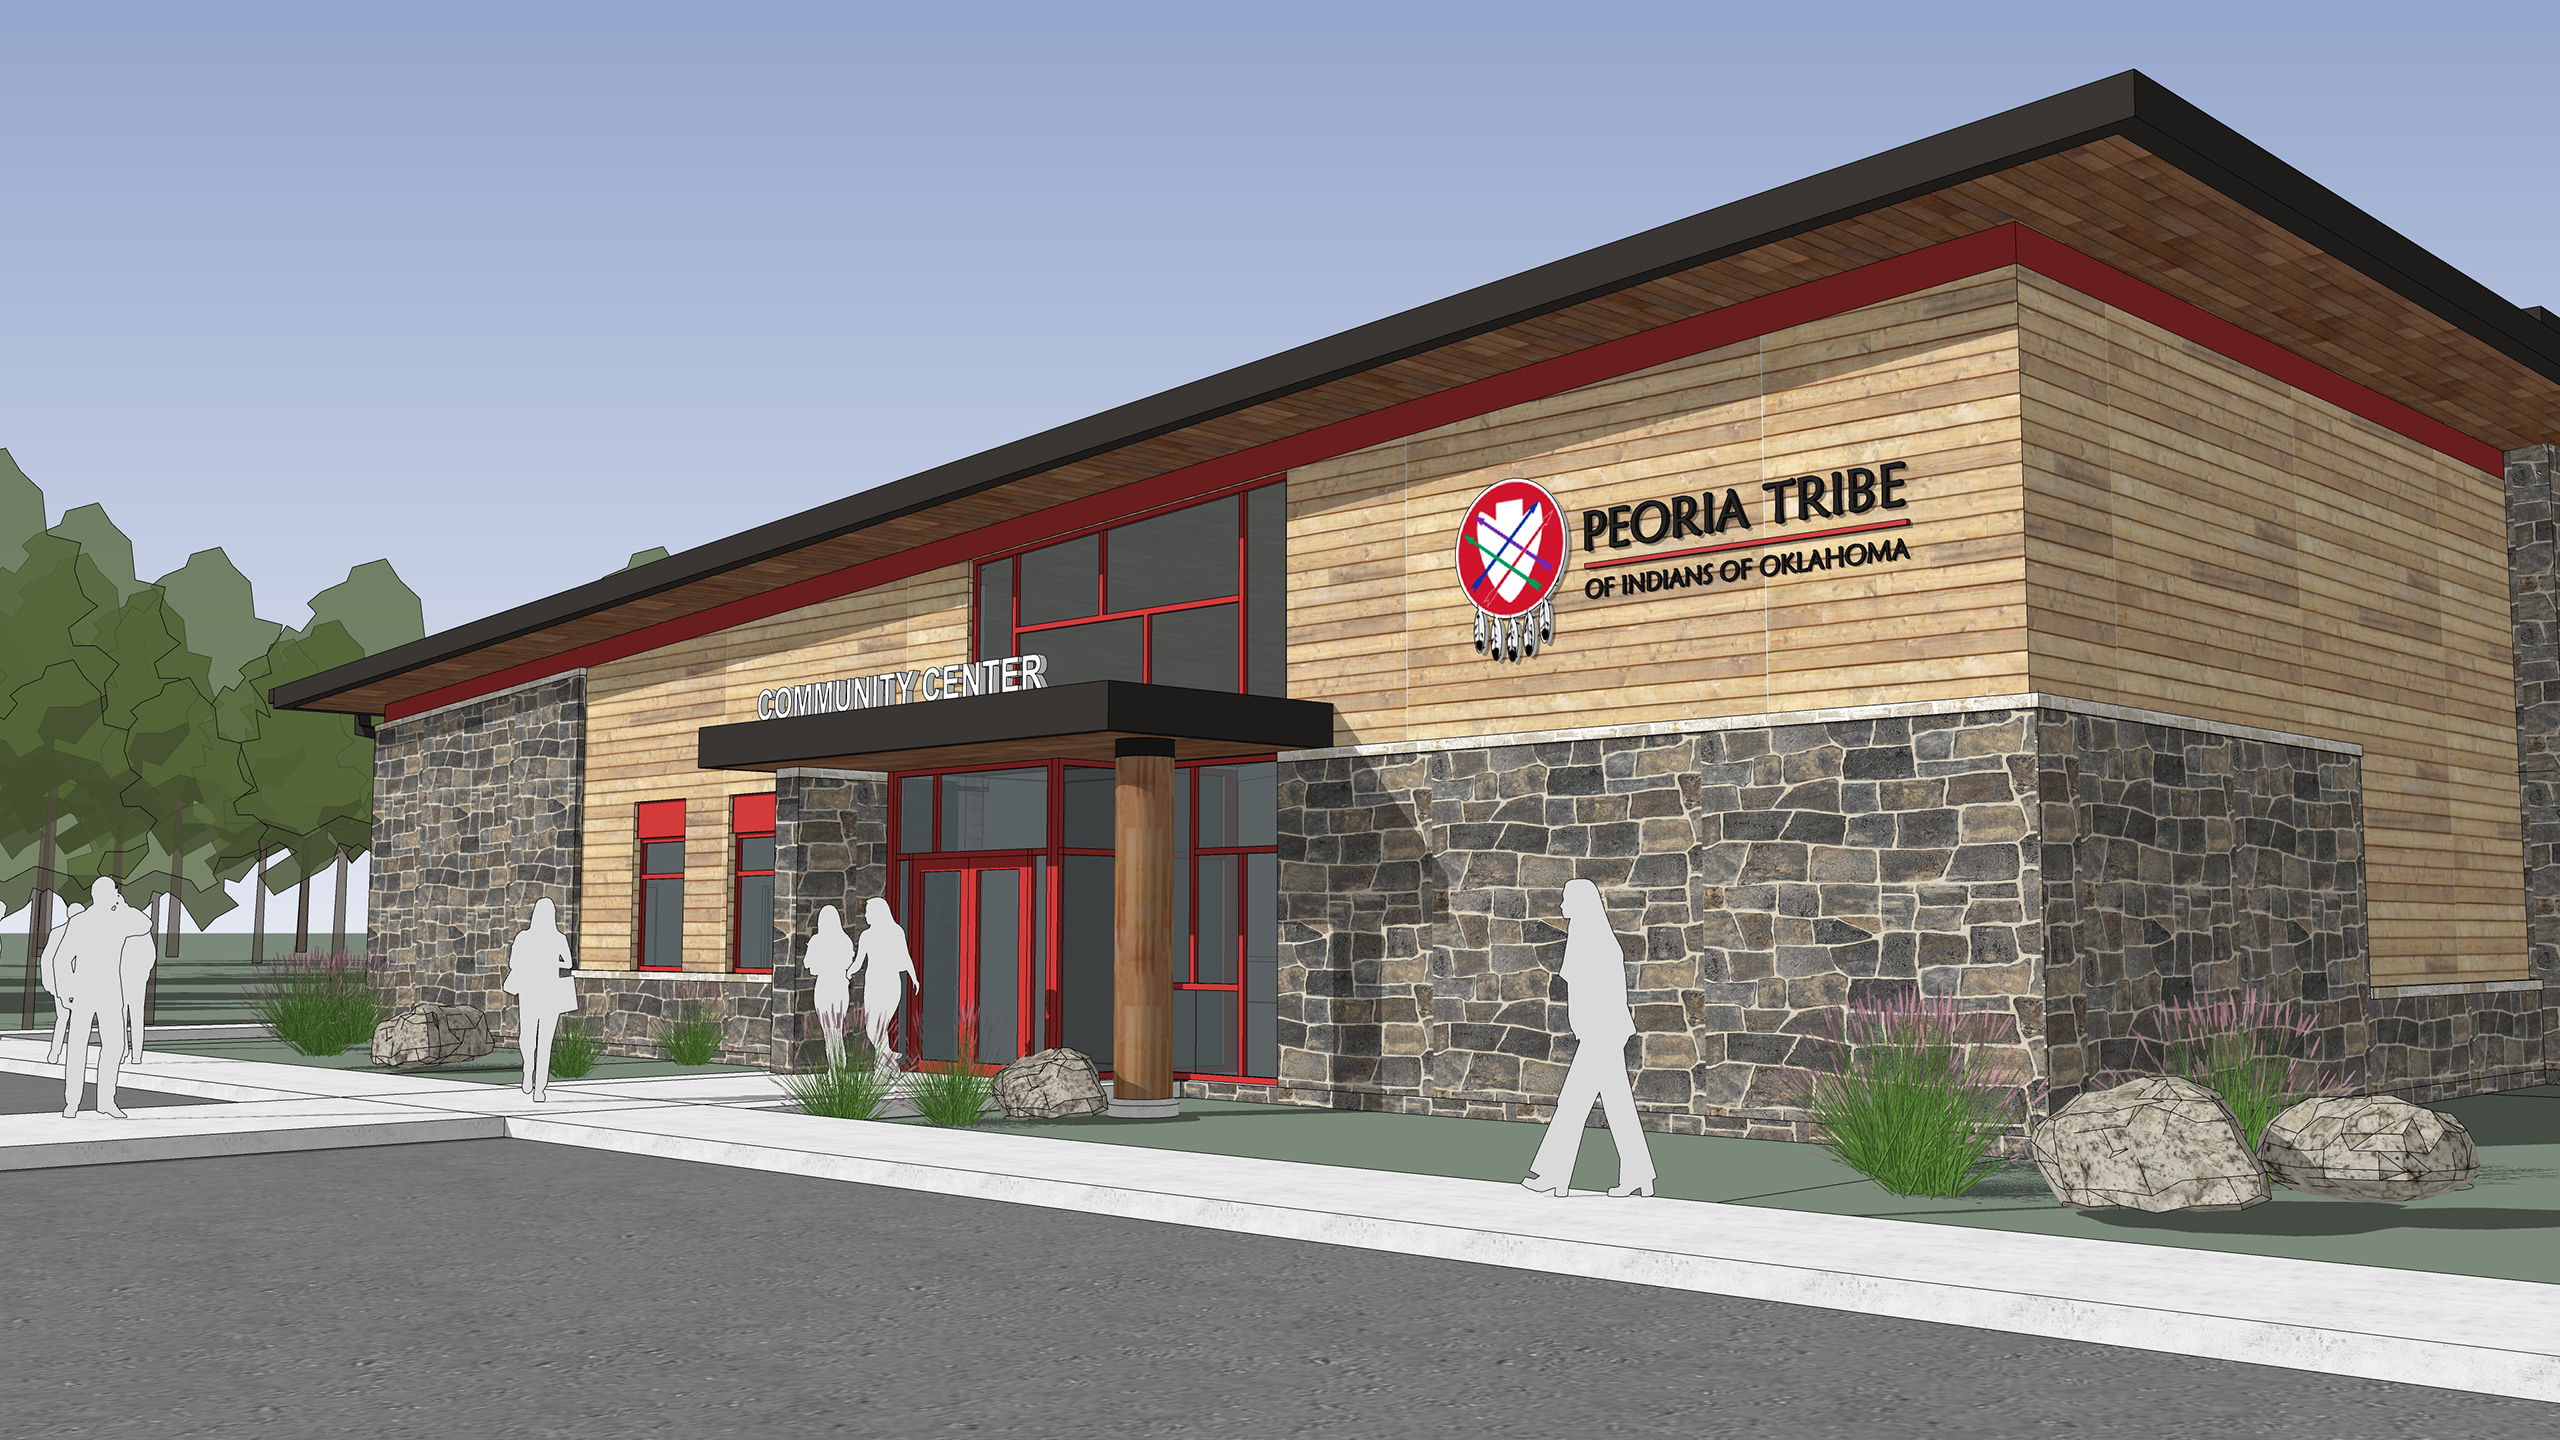 Exterior rendering of the Peoria Tribe's Longhouse Community Center